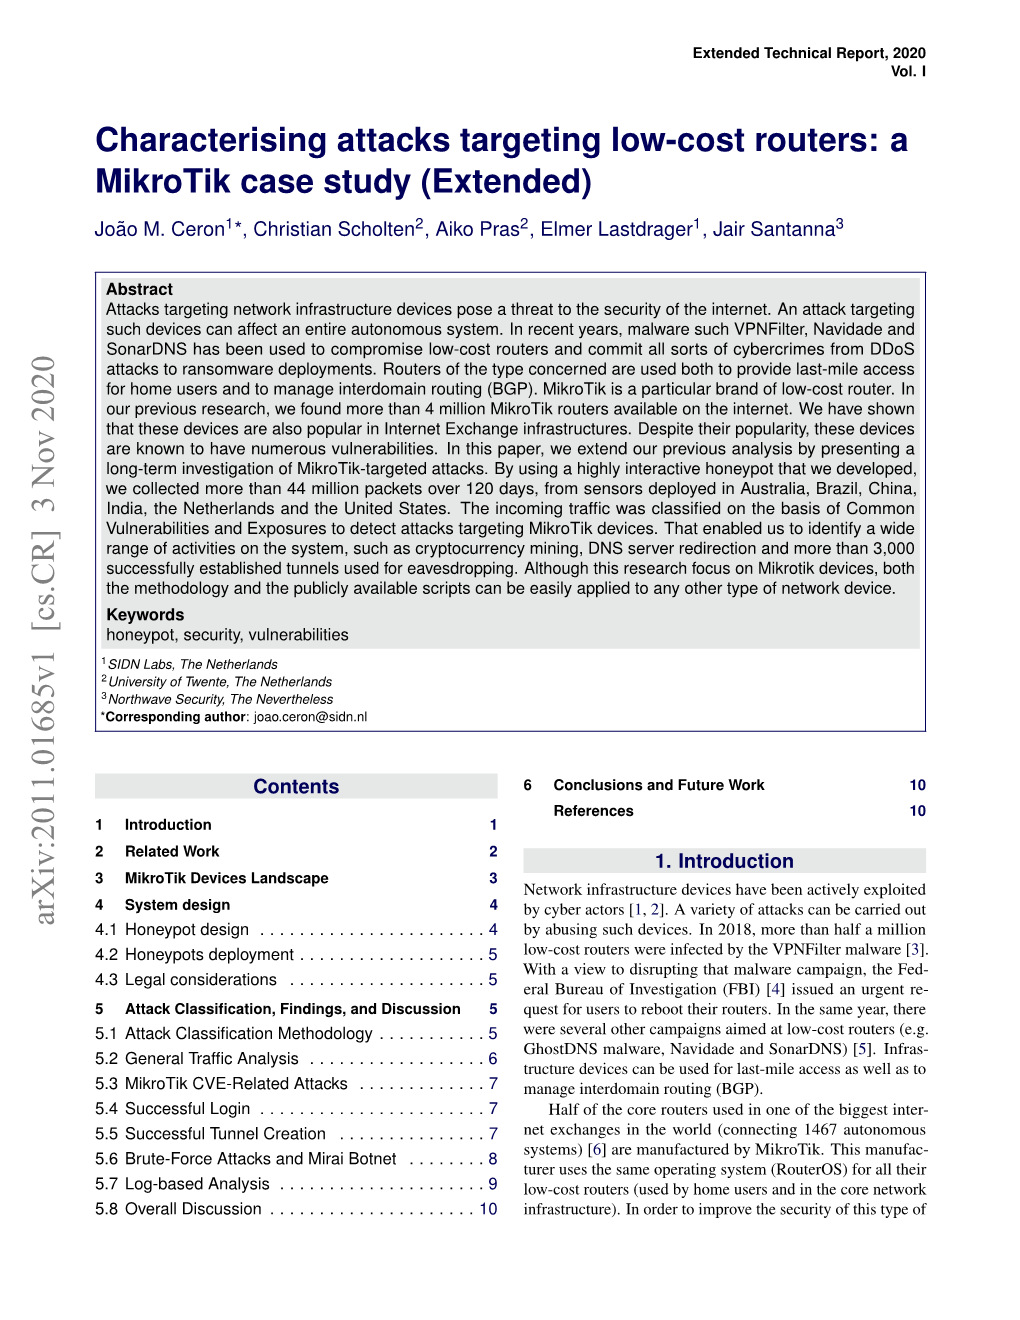 Characterising Attacks Targeting Low-Cost Routers: a Mikrotik Case Study (Extended)